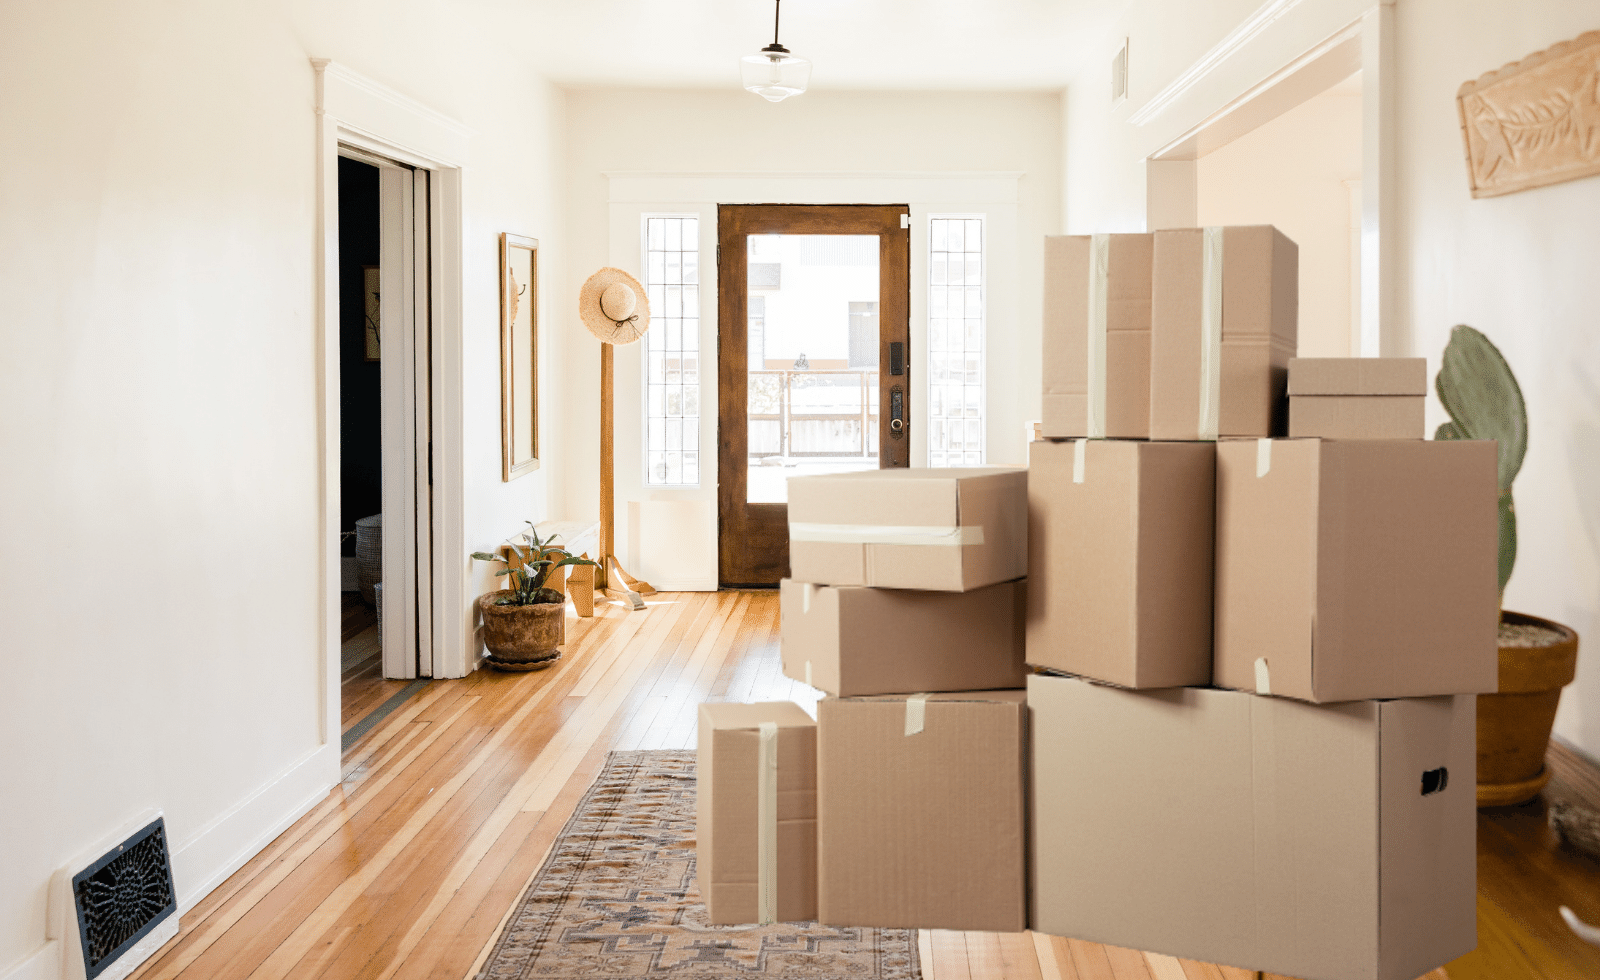 moving home as an adult